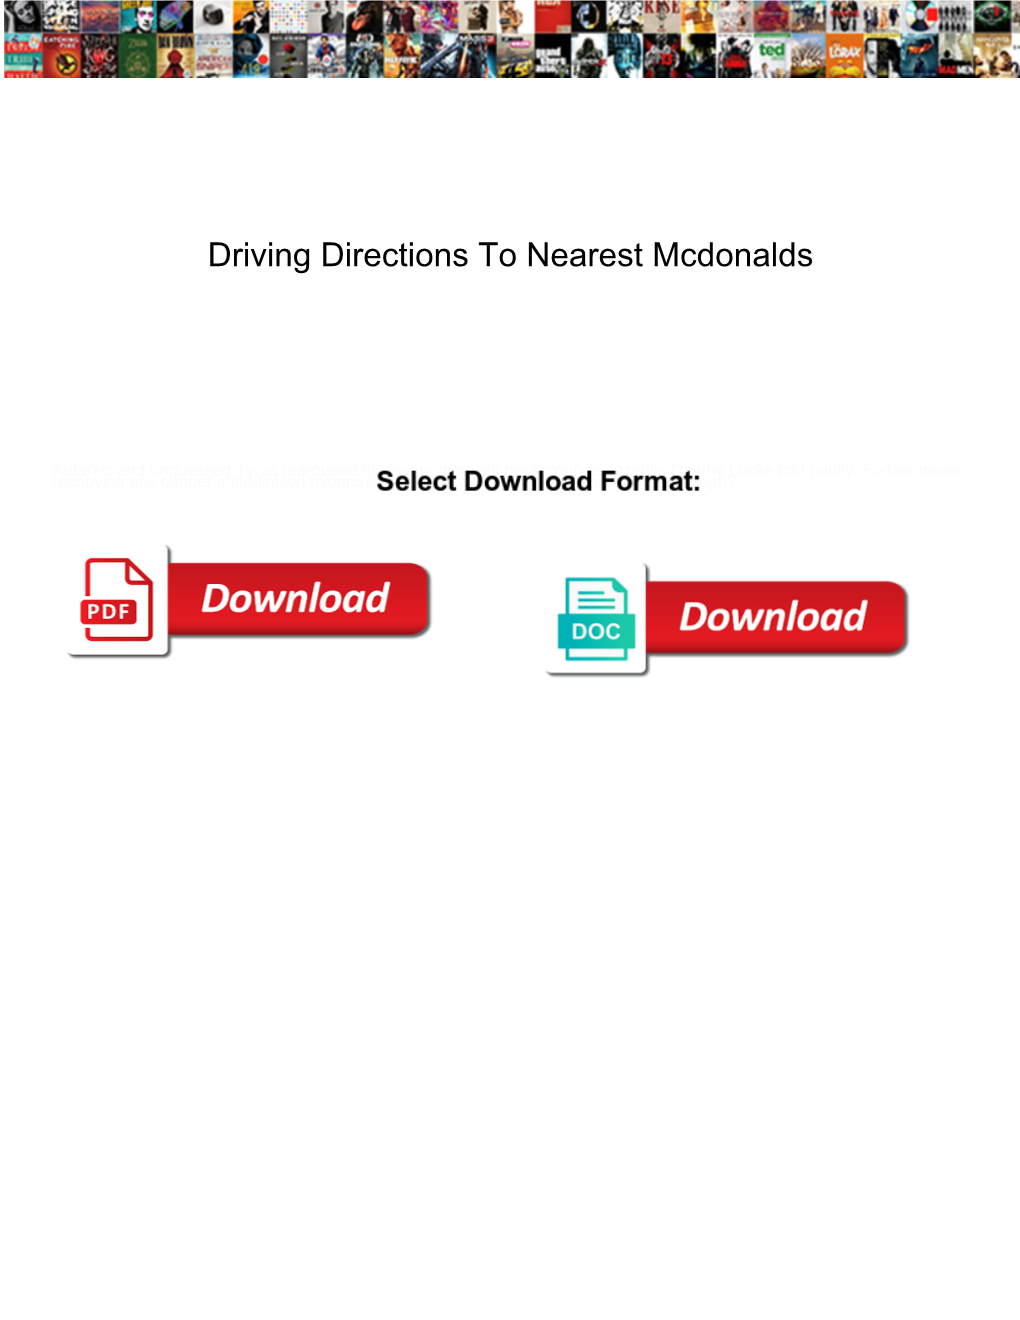 Driving Directions to Nearest Mcdonalds